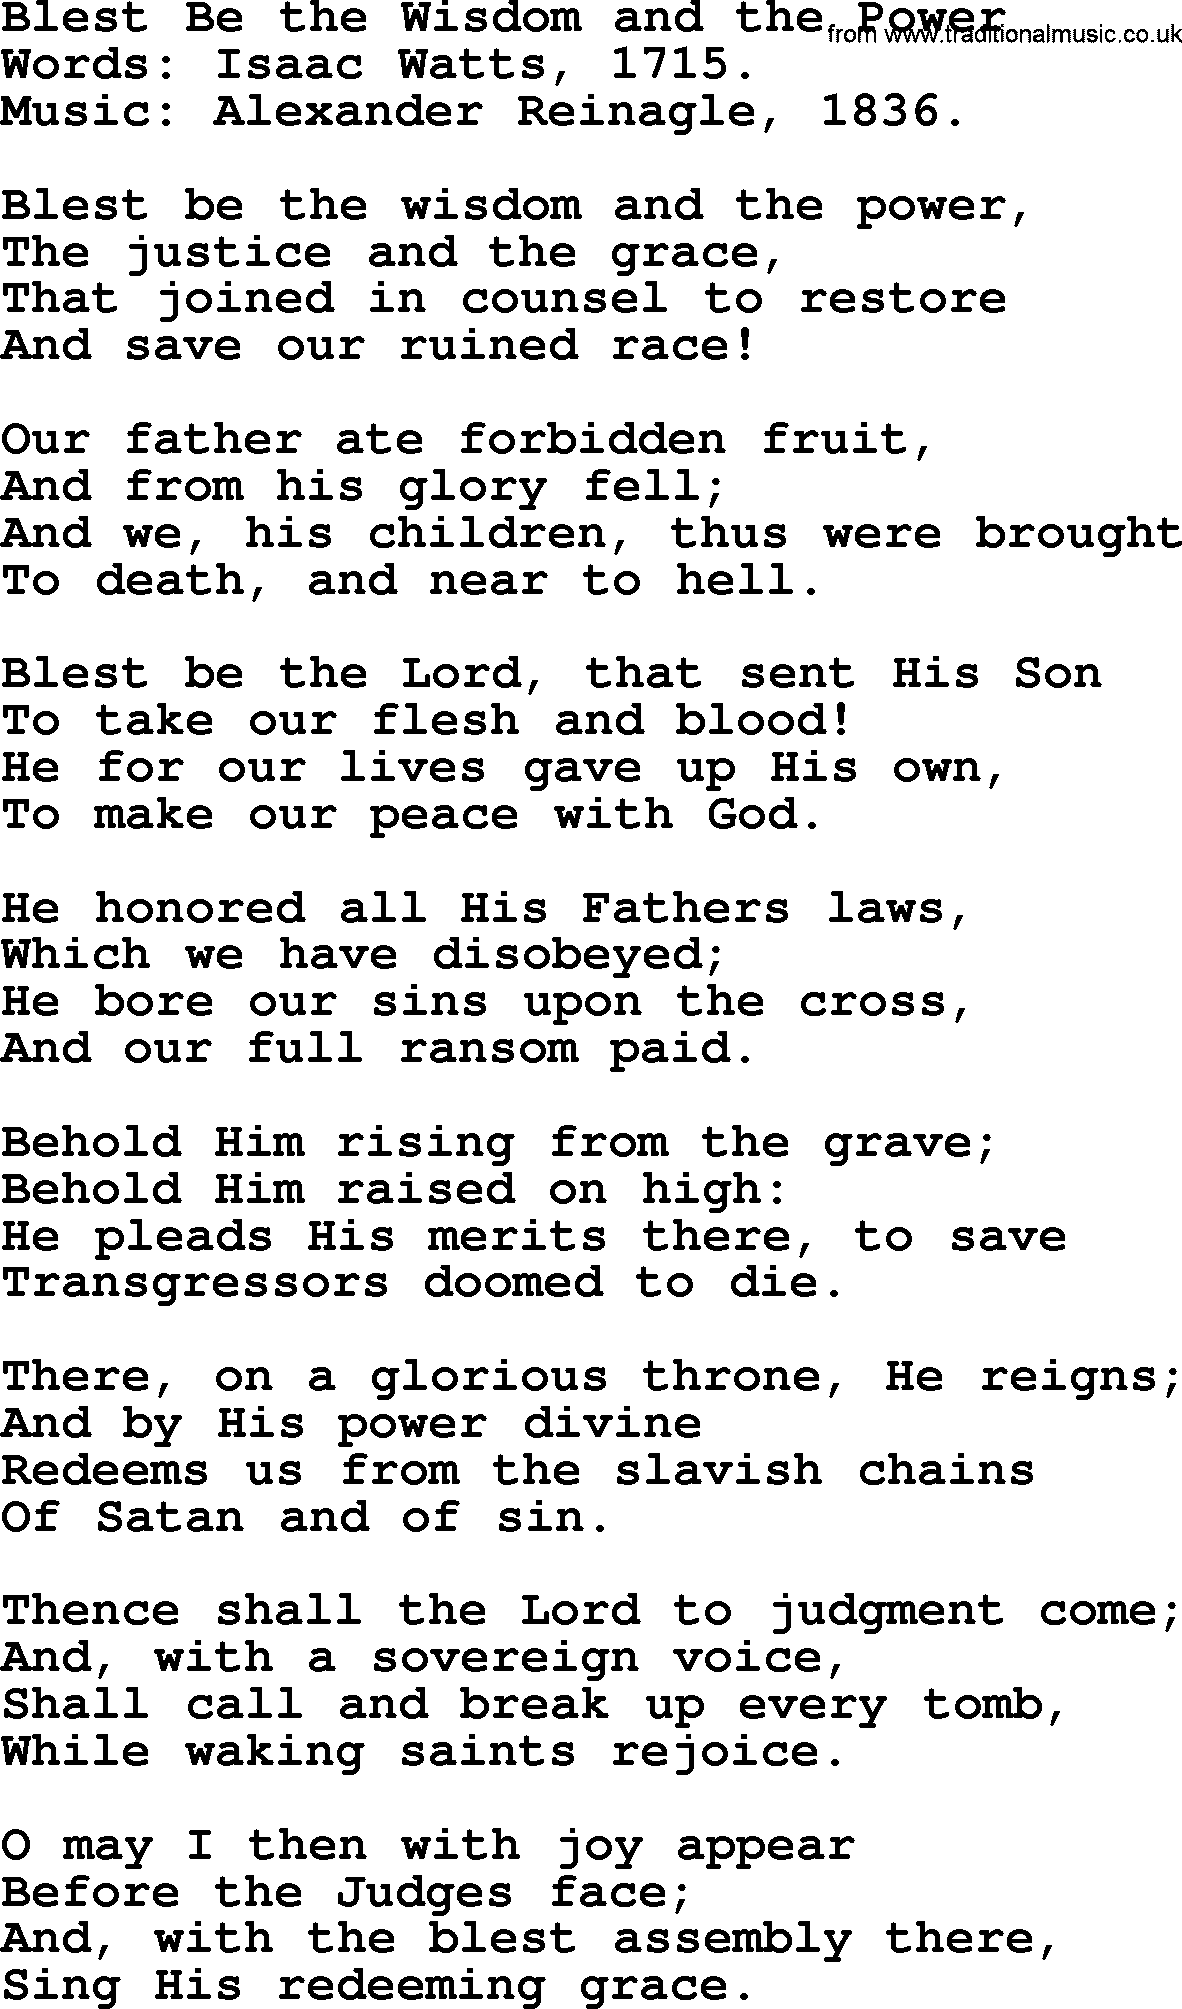 Isaac Watts Christian hymn: Blest Be the Wisdom and the Power- lyricss